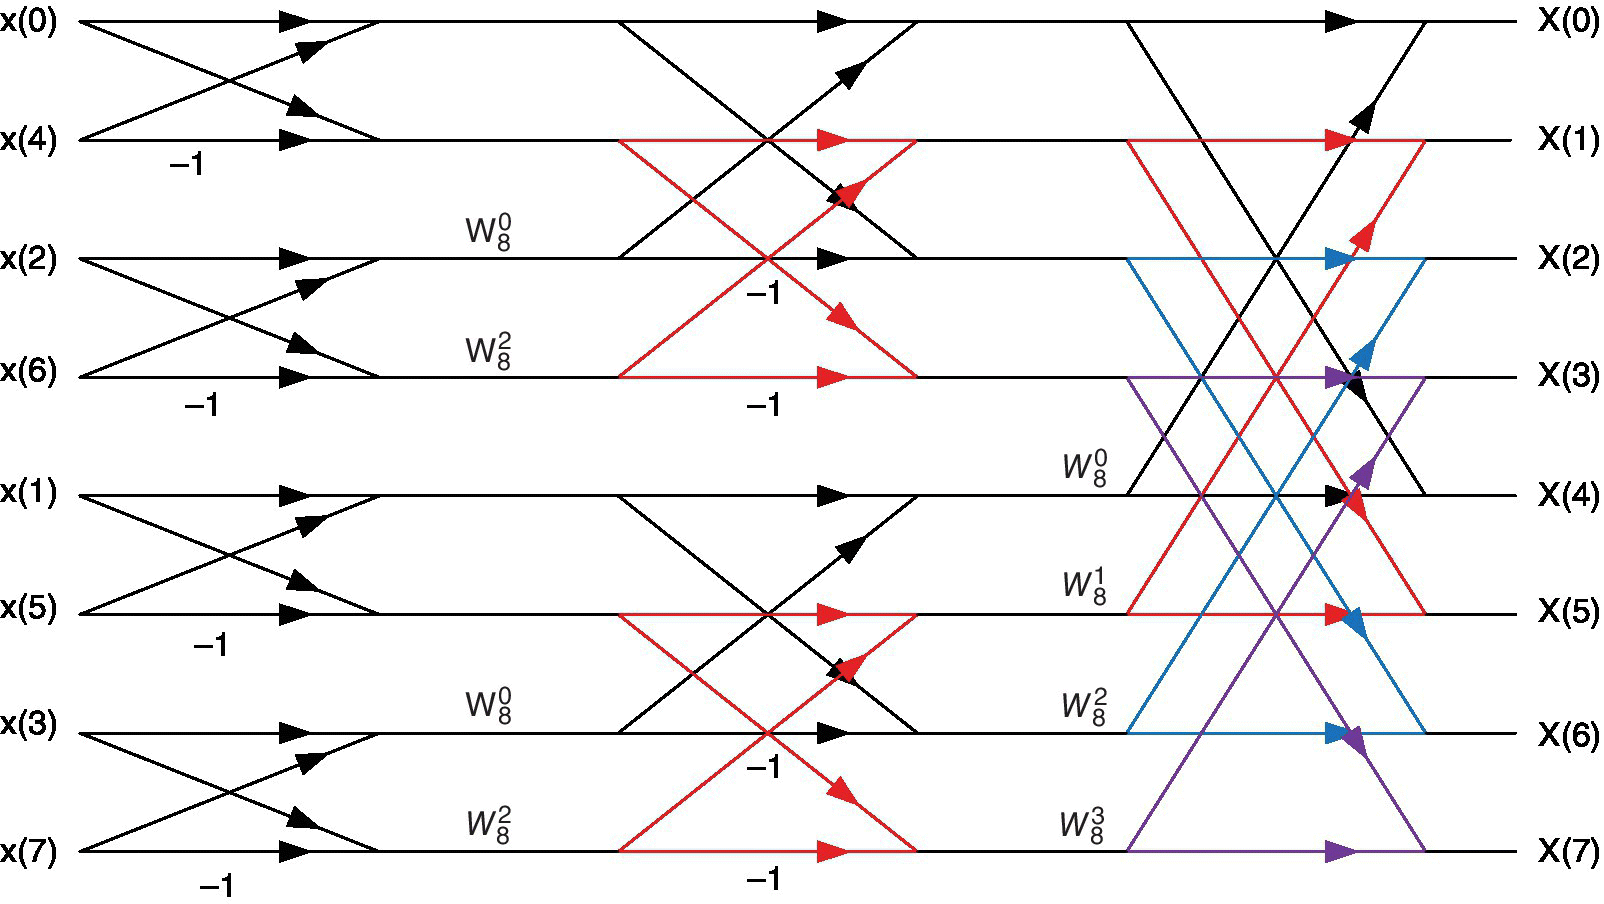 Schematic with crisscrossed arrows illustrating the decimation in time (DIT) Radix 2 FFT with labels W80, W82, W83, etc.